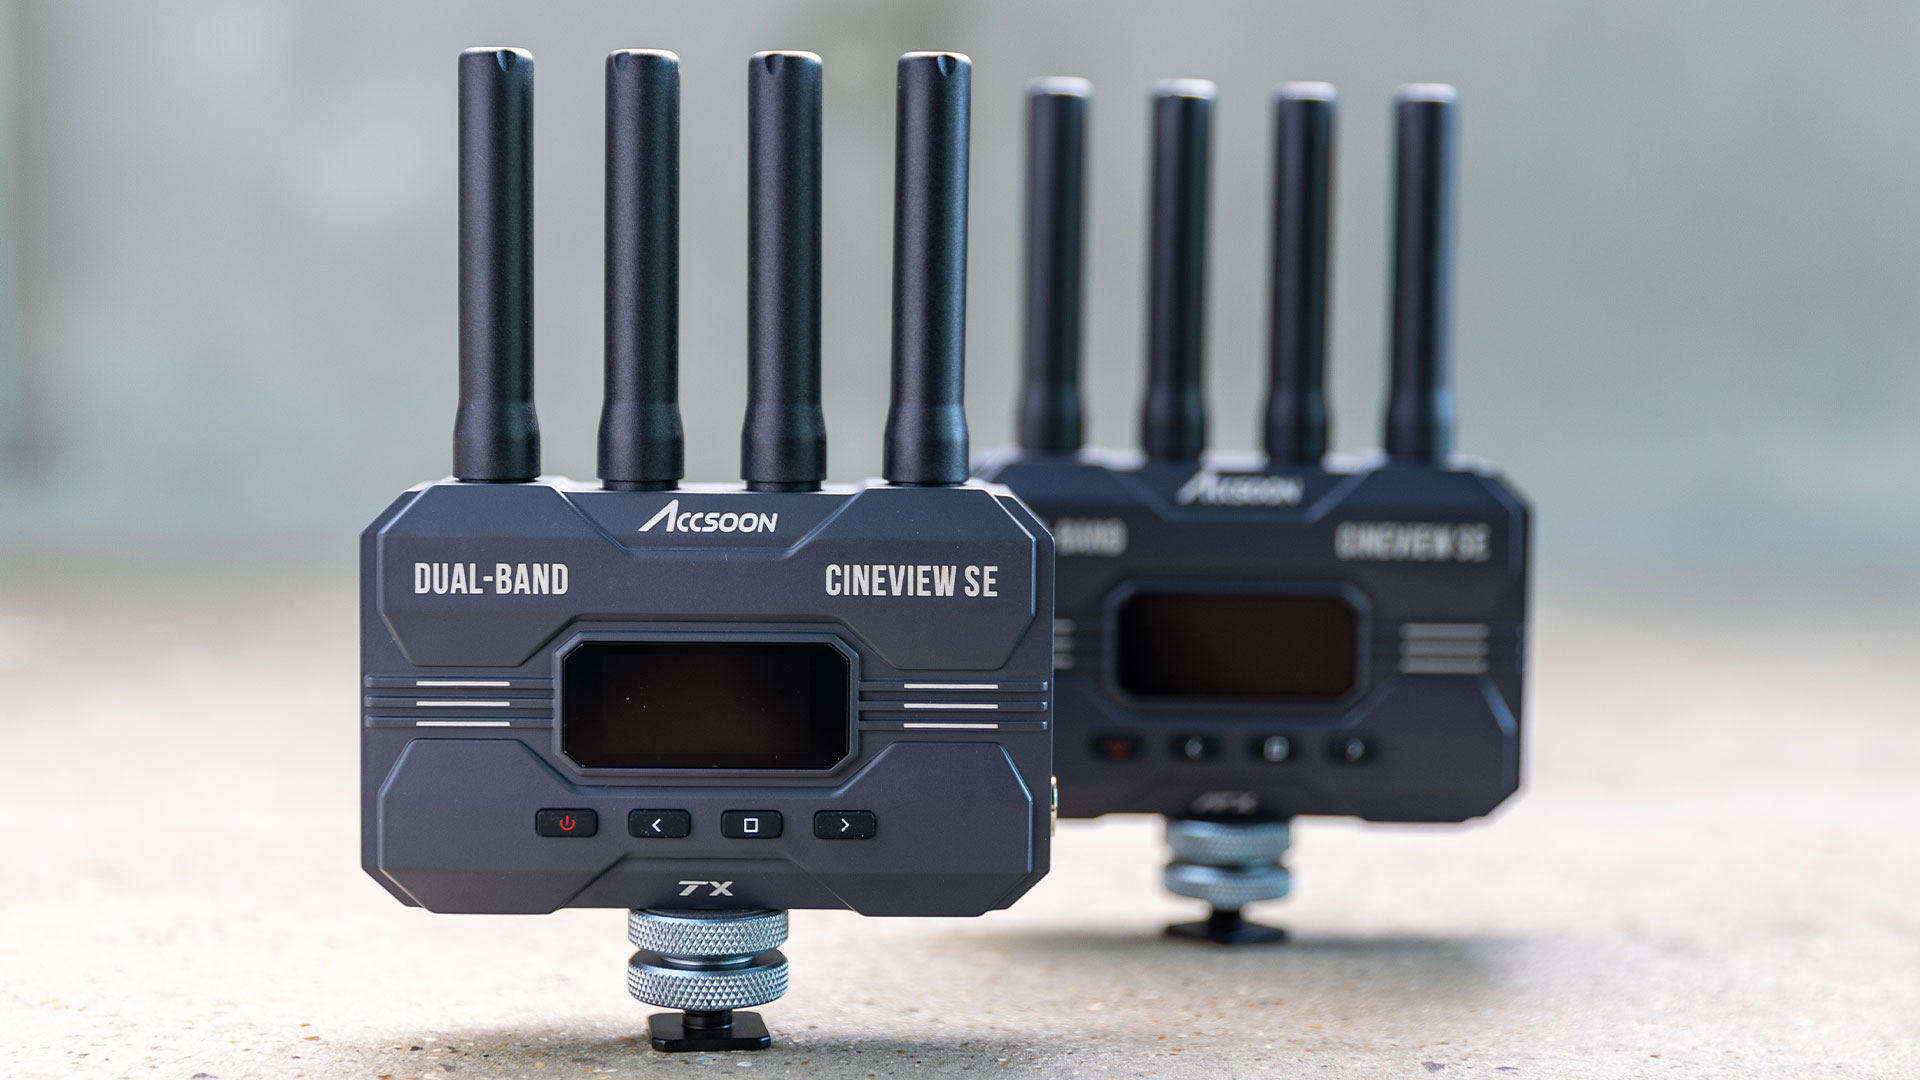 Accsoon CineView SE - Wireless SDI and HDMI Video Transmission